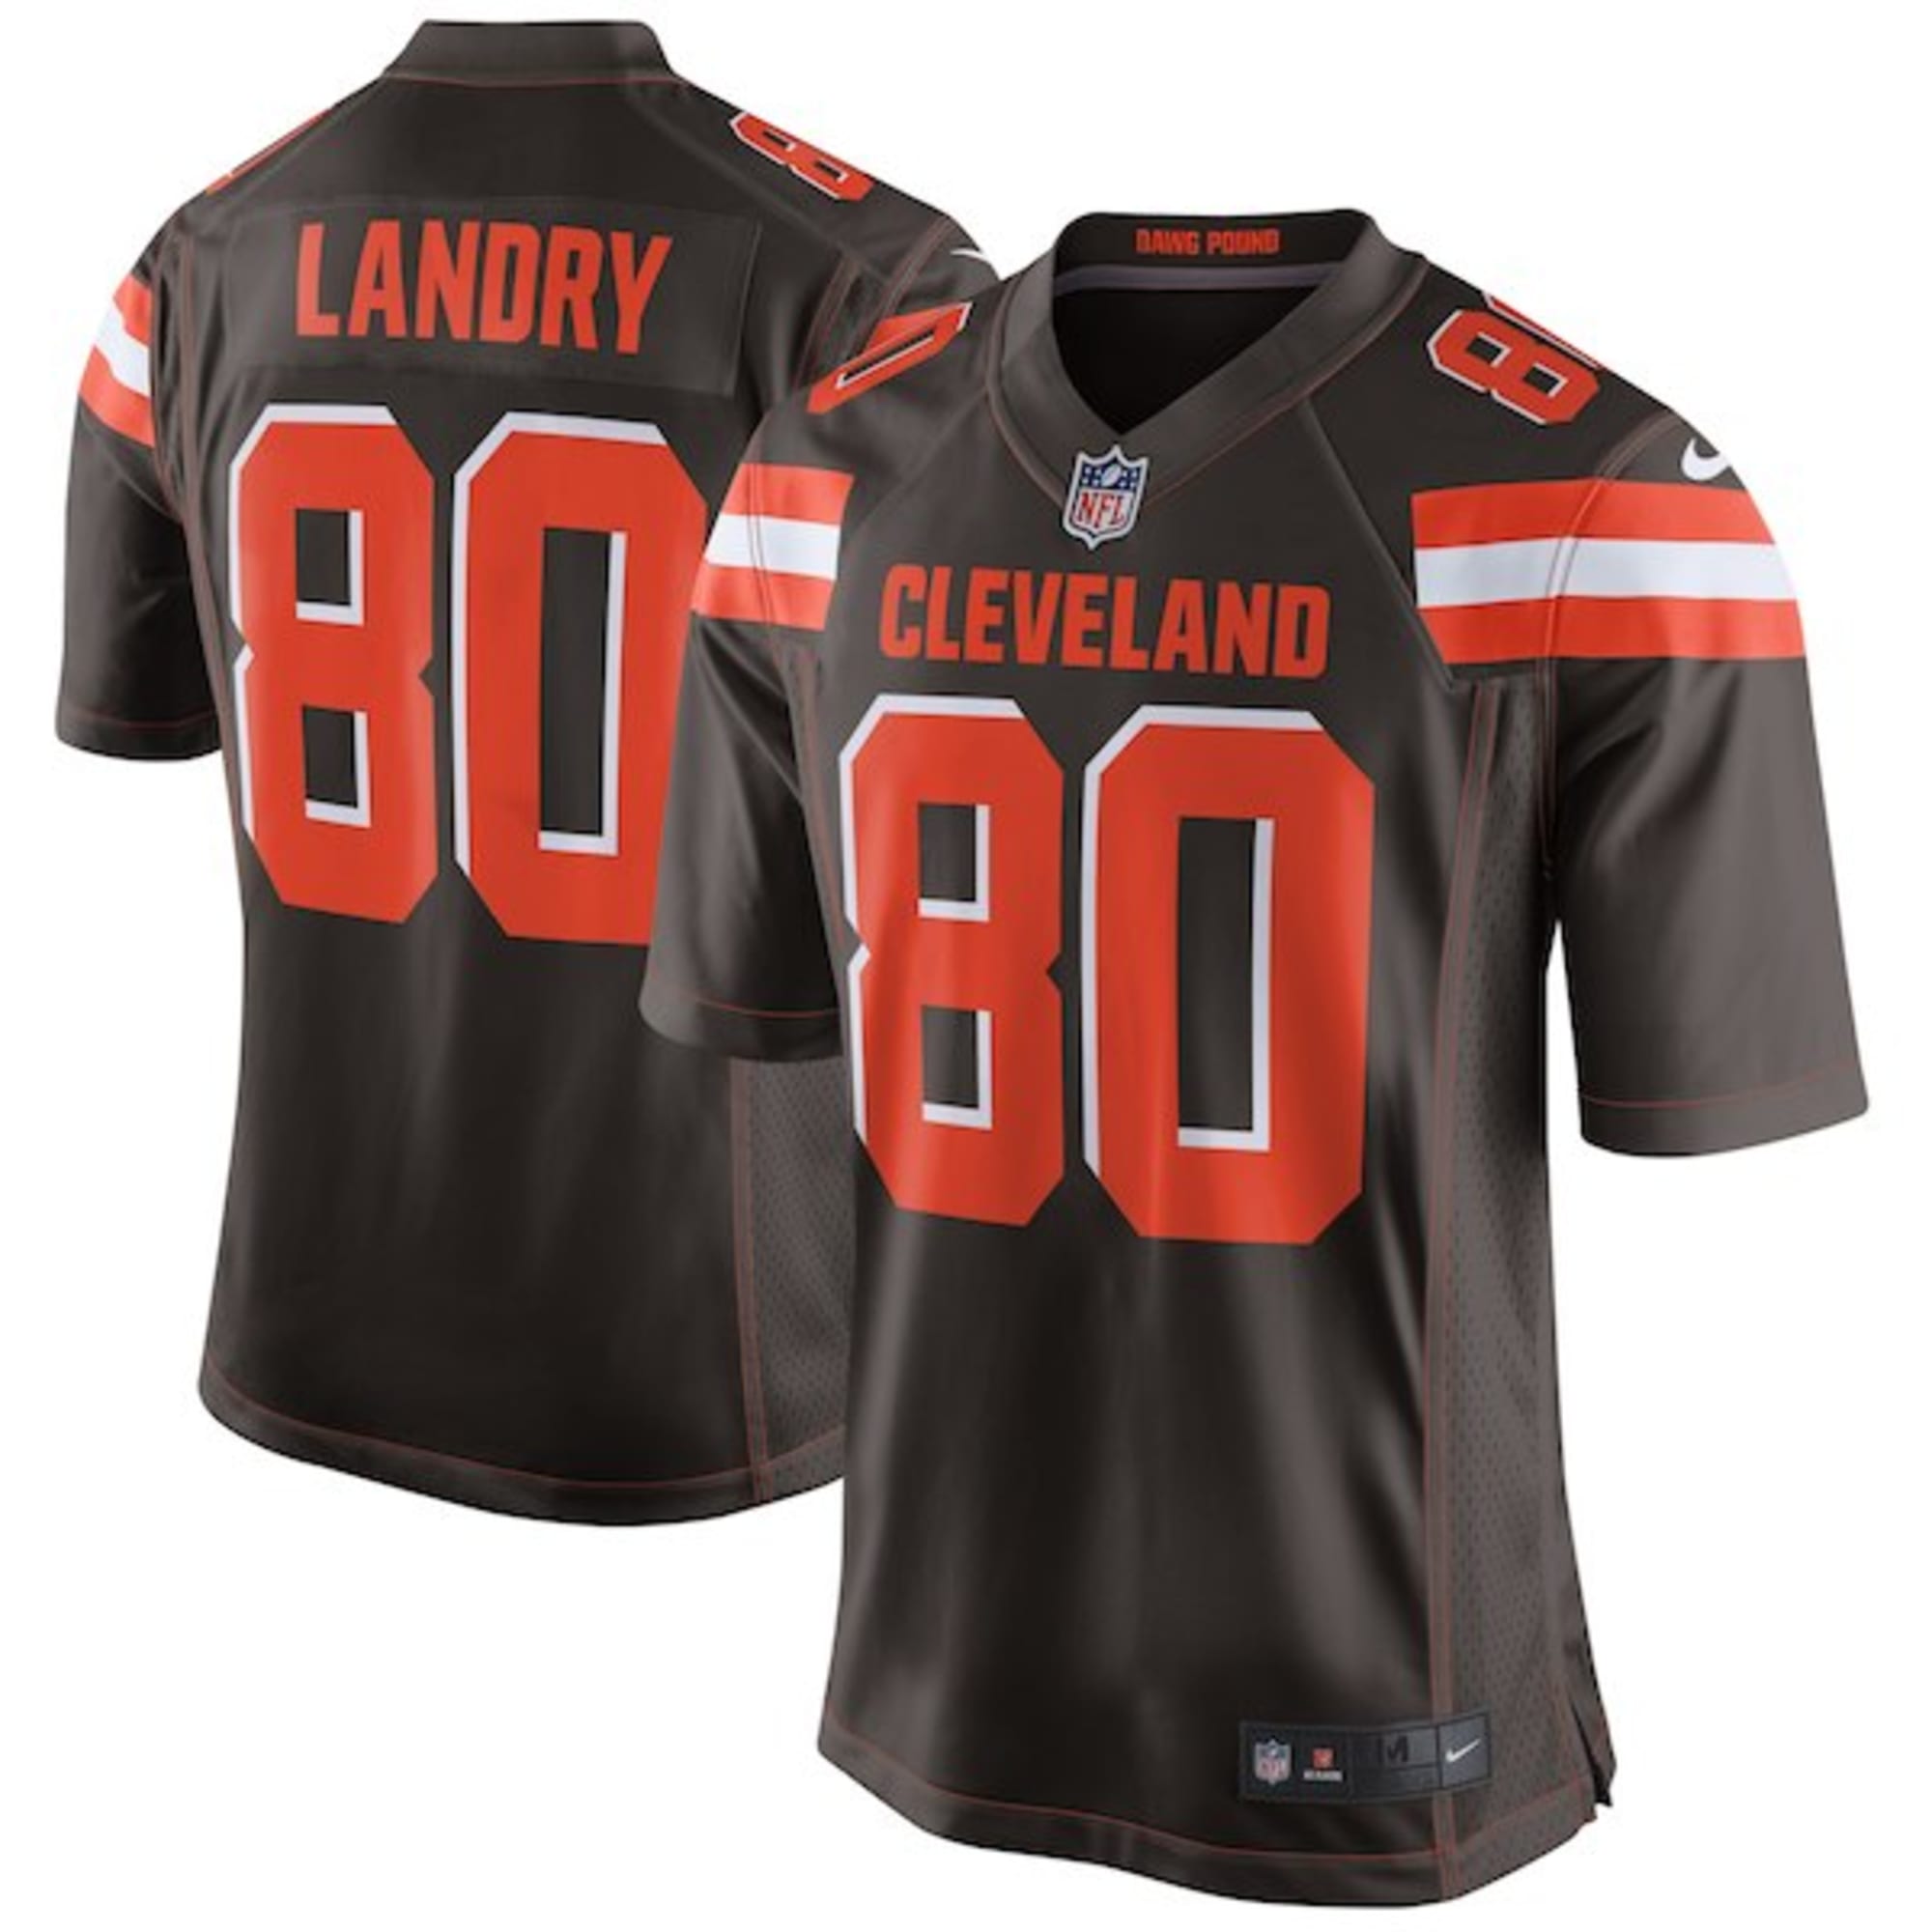 Must-have Cleveland Browns items for 